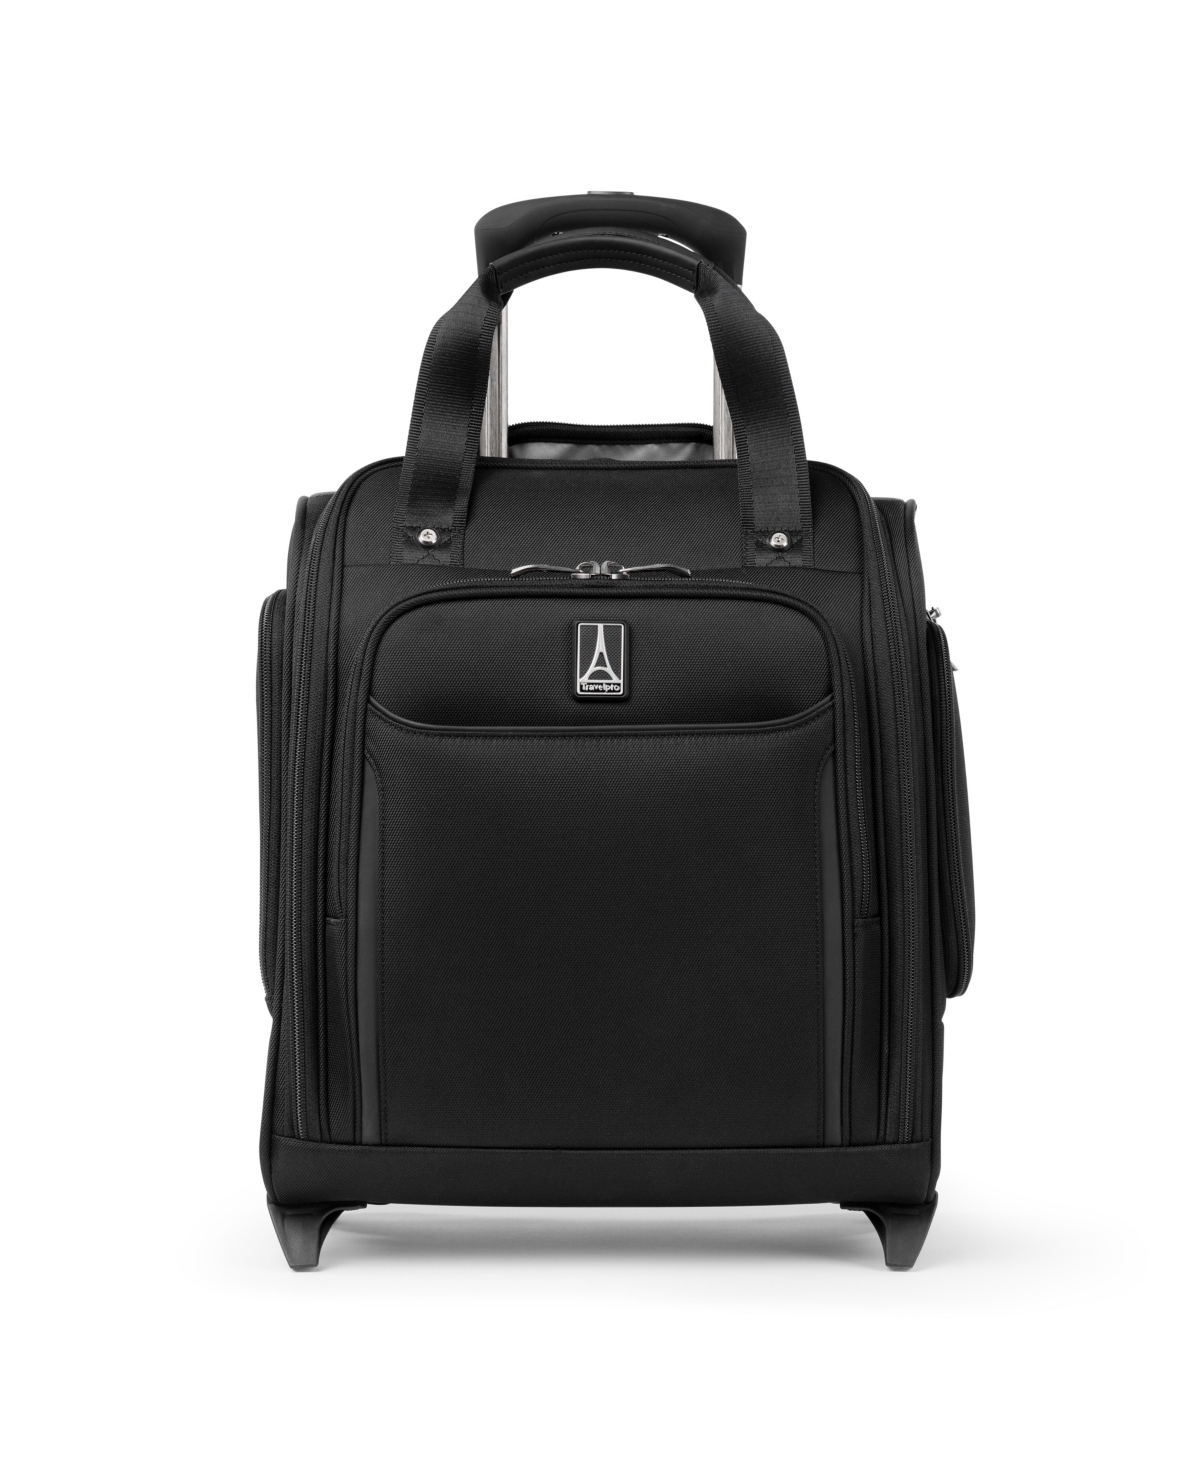 Travelpro Crew Classic Rolling Under Seat Carry-on Luggage In Jet Black